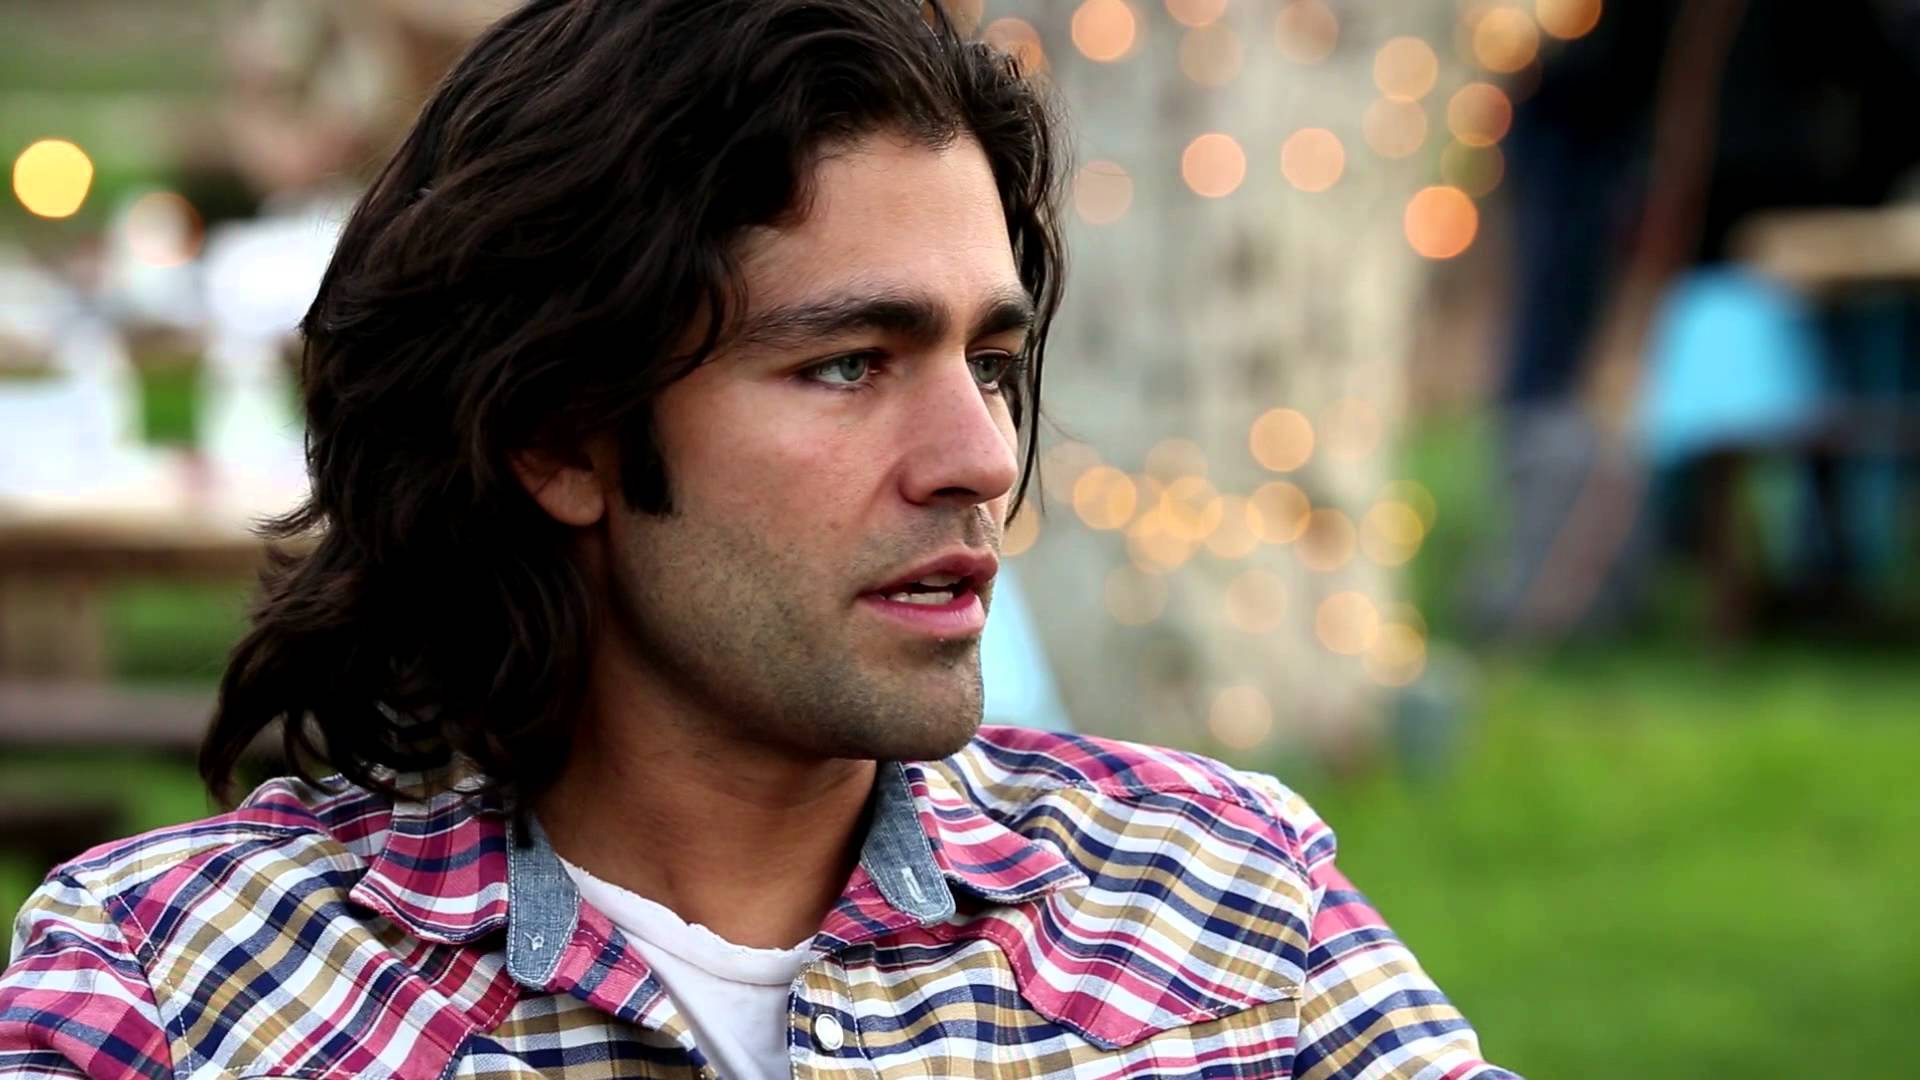 More Pictures Of Adrian Grenier. adrian grenier quotes. 